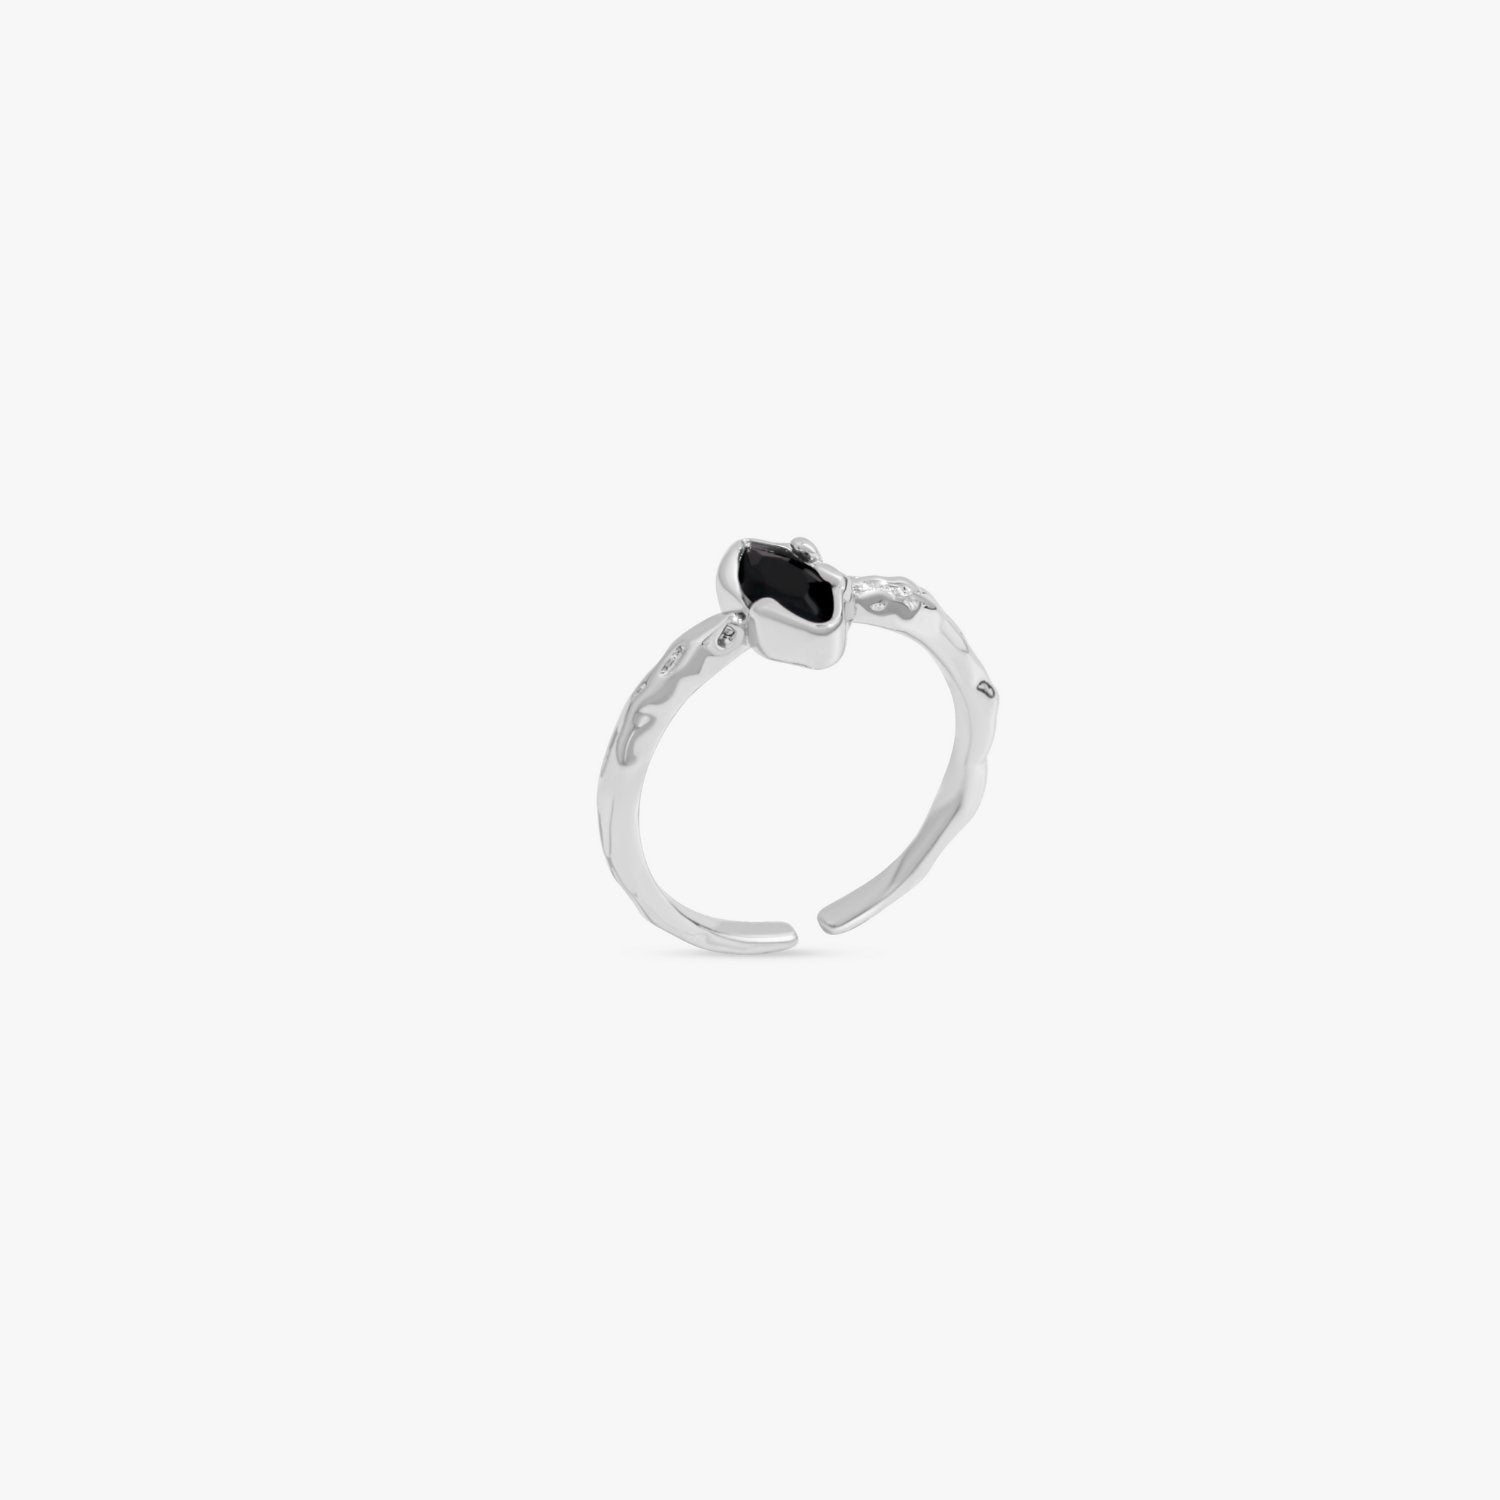 Thin Texture Black Gem Adjustable Sterling Silver Ring - Flaire & Co.